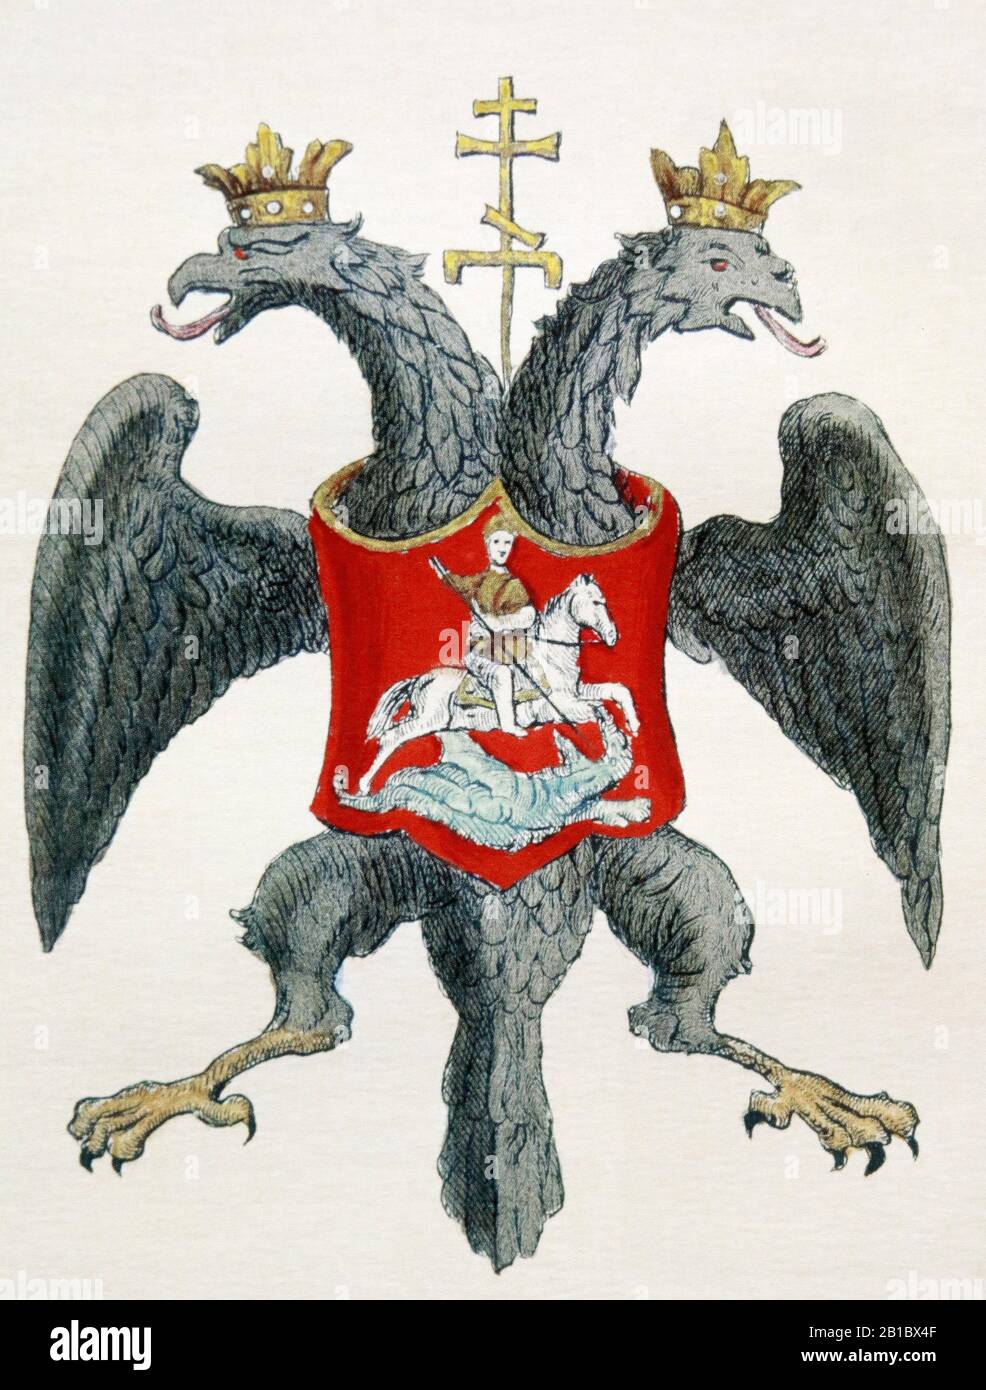 Coat of arms of the Russian tsar Mikhail Fedorovich. Illustration of the 17th century. Stock Photo